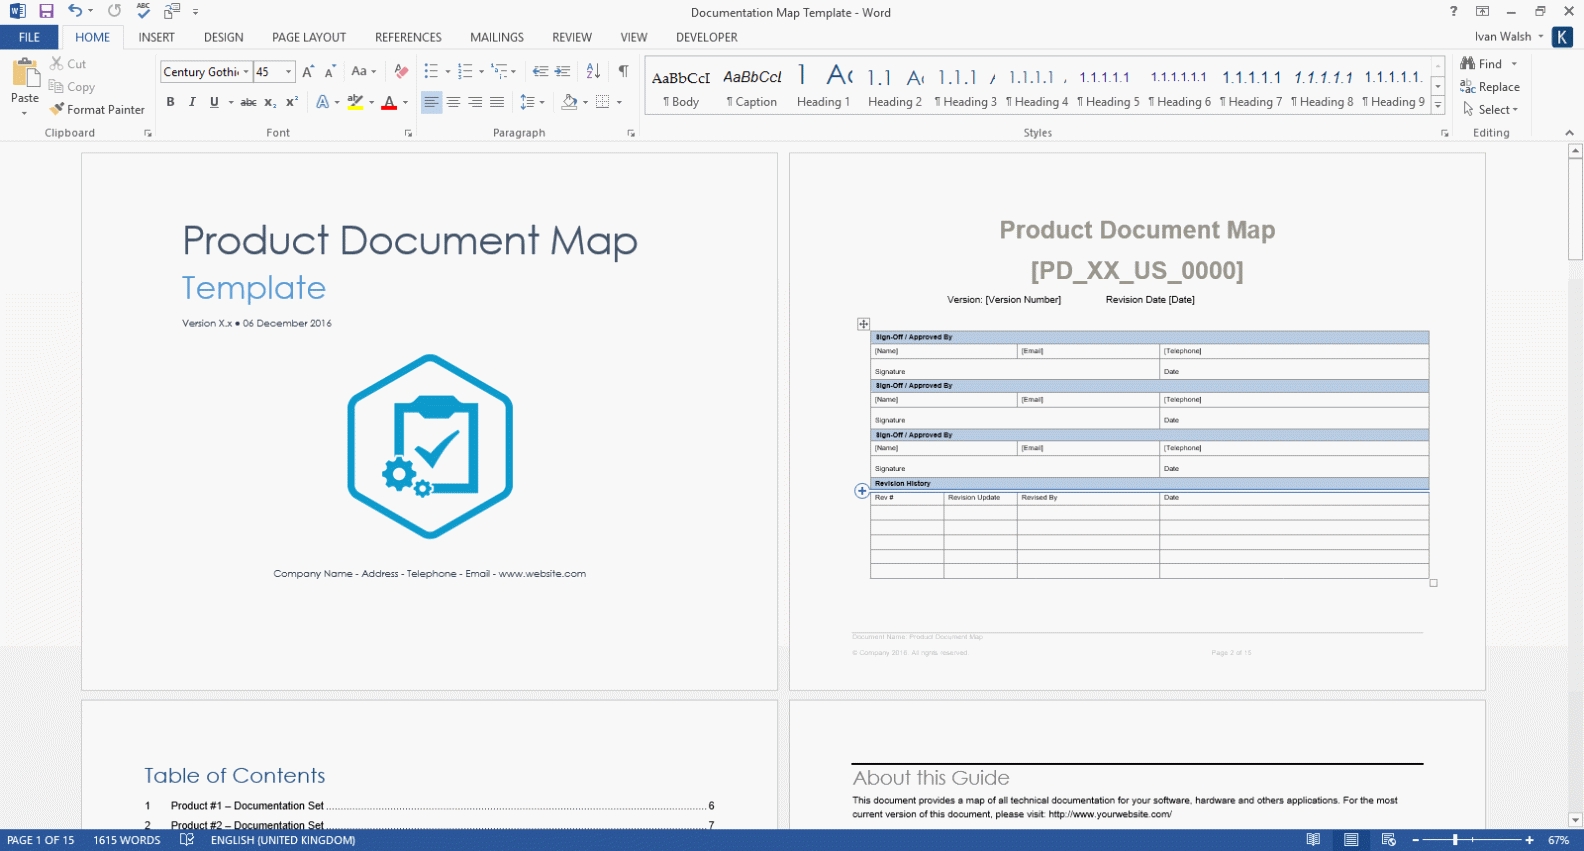 Product Document Map Template (Ms Word) - Templates, Forms, Checklists For Ms Office And Apple Iwork For Information Mapping Word Template